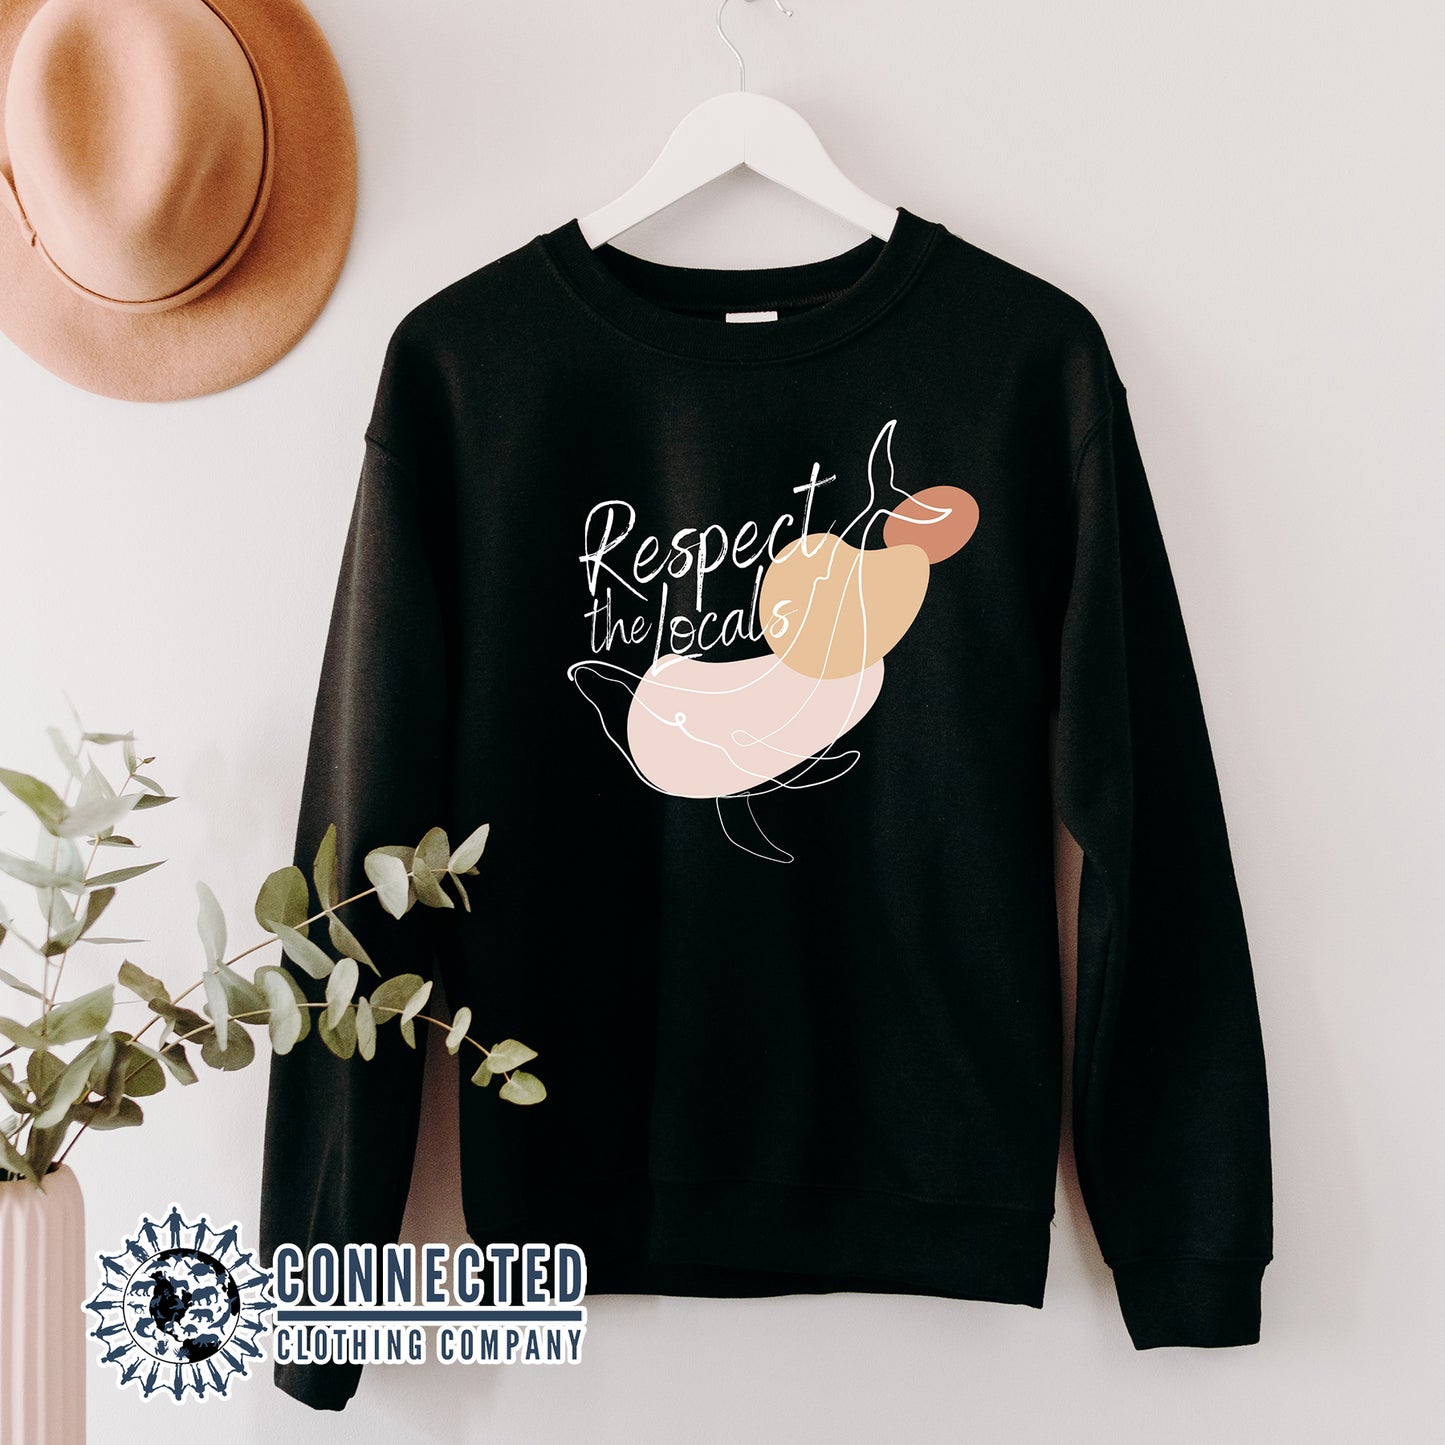 Black Respect The Locals Whale Unisex Crewneck Sweatshirt - Connected Clothing Company - Ethically and Sustainably Made - 10% of profits donated to ocean conservation